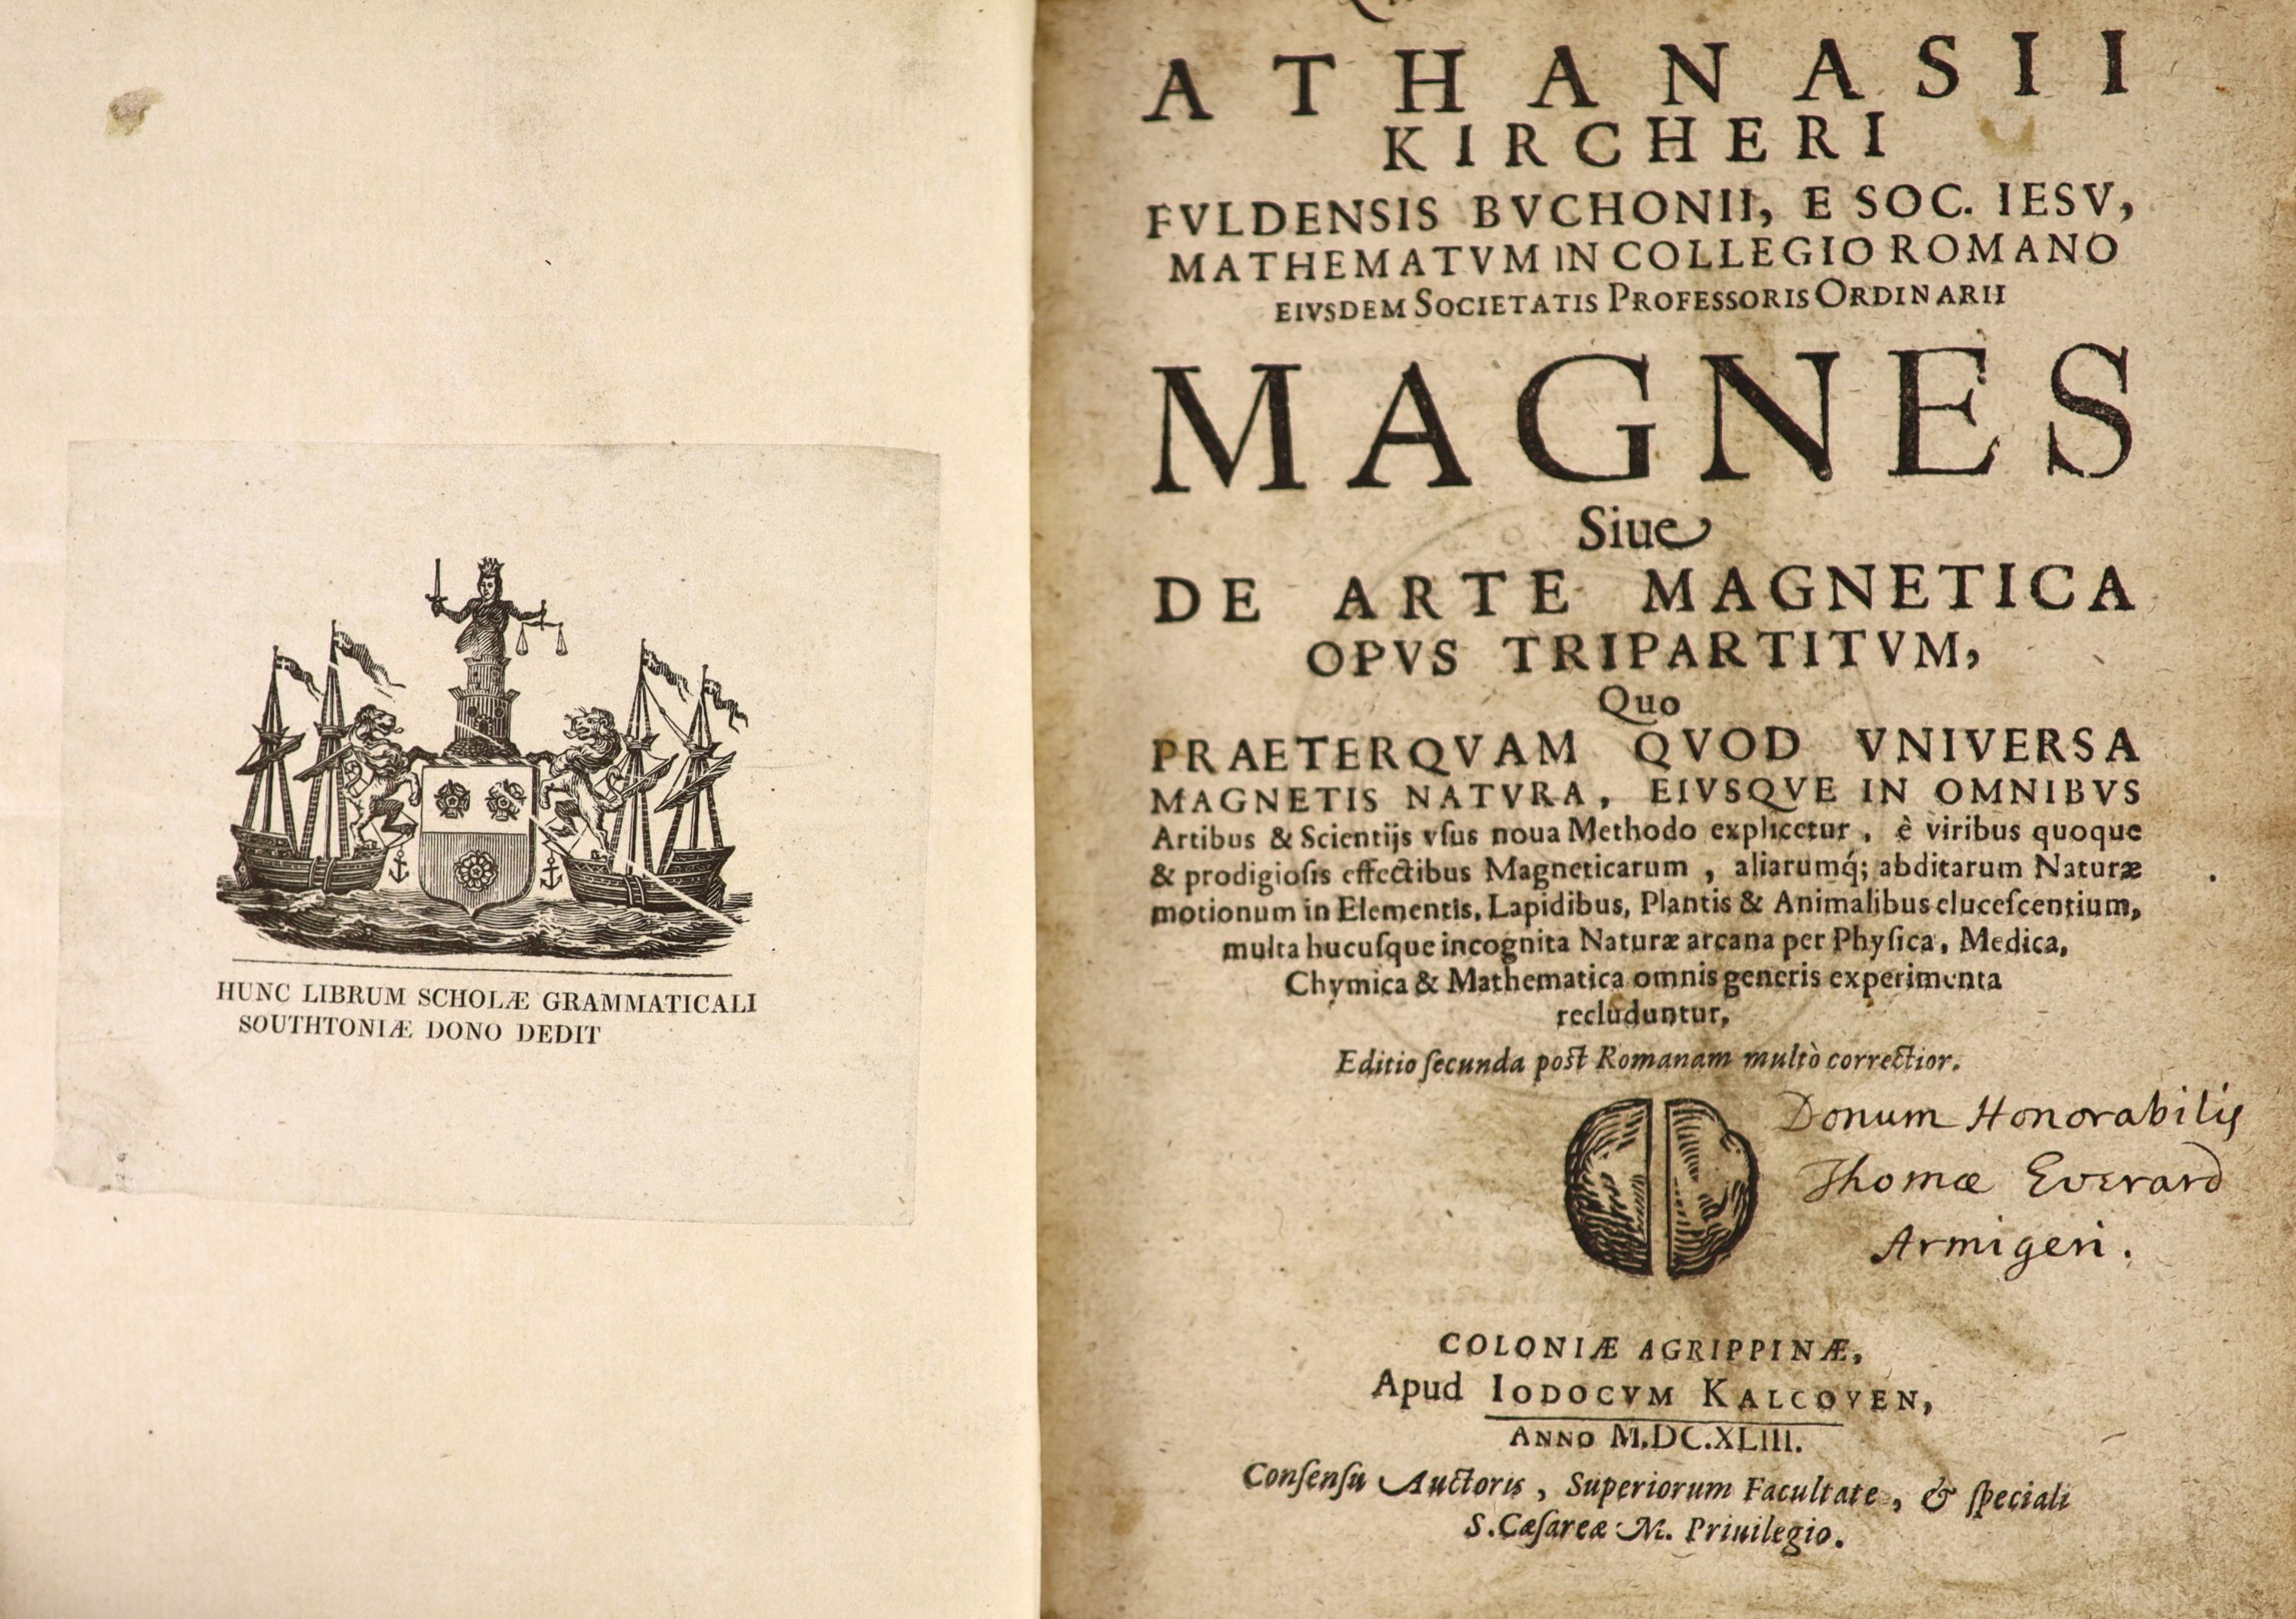 Kircher, Athanasius - Magnes sive de Arte Magnetica Opus Tripartitum ... editio secunda post Romanam multo correctior. 27 engraved plates (only, ex.29), many text illus. & diagrs (3 full page); (28), 798, (38) pp.; newly